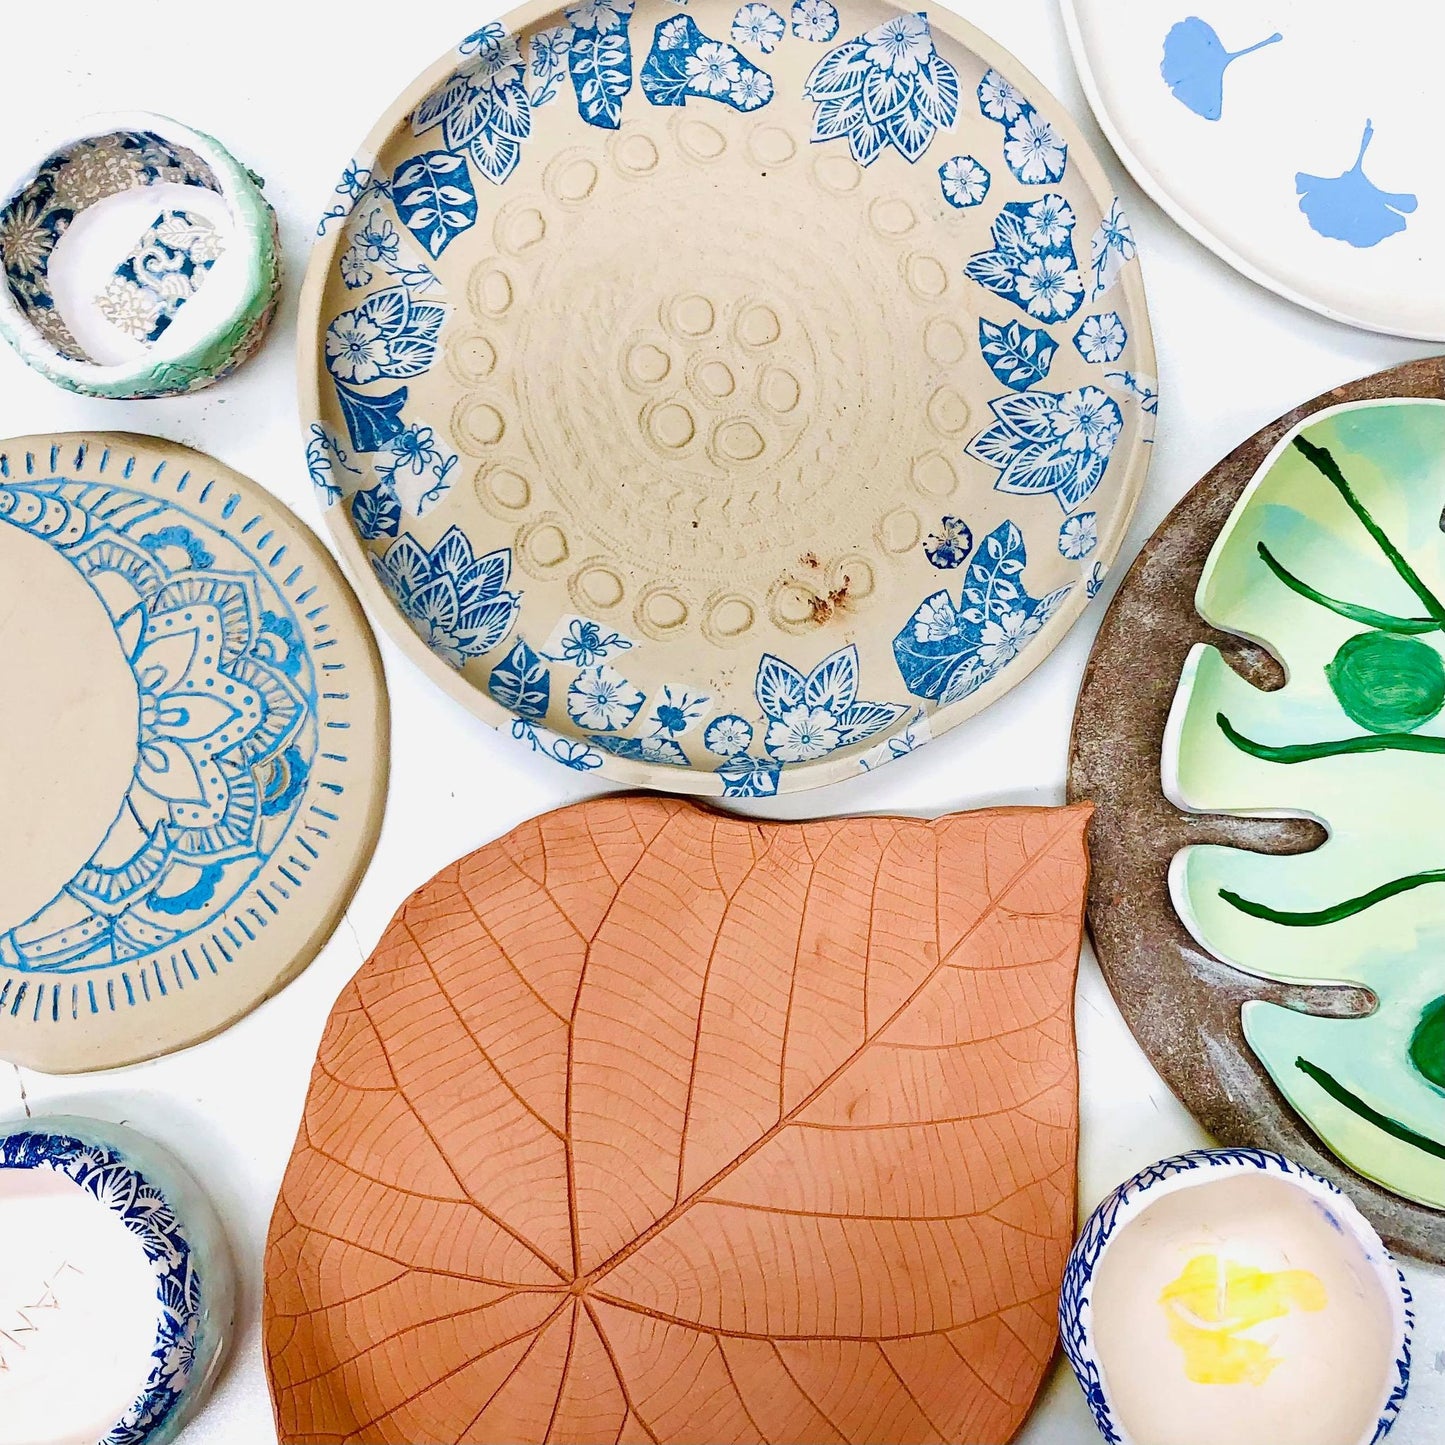 Create you own hand built Pottery Platter and Dip Bowl -  Sat 11th Nov 1-3pm